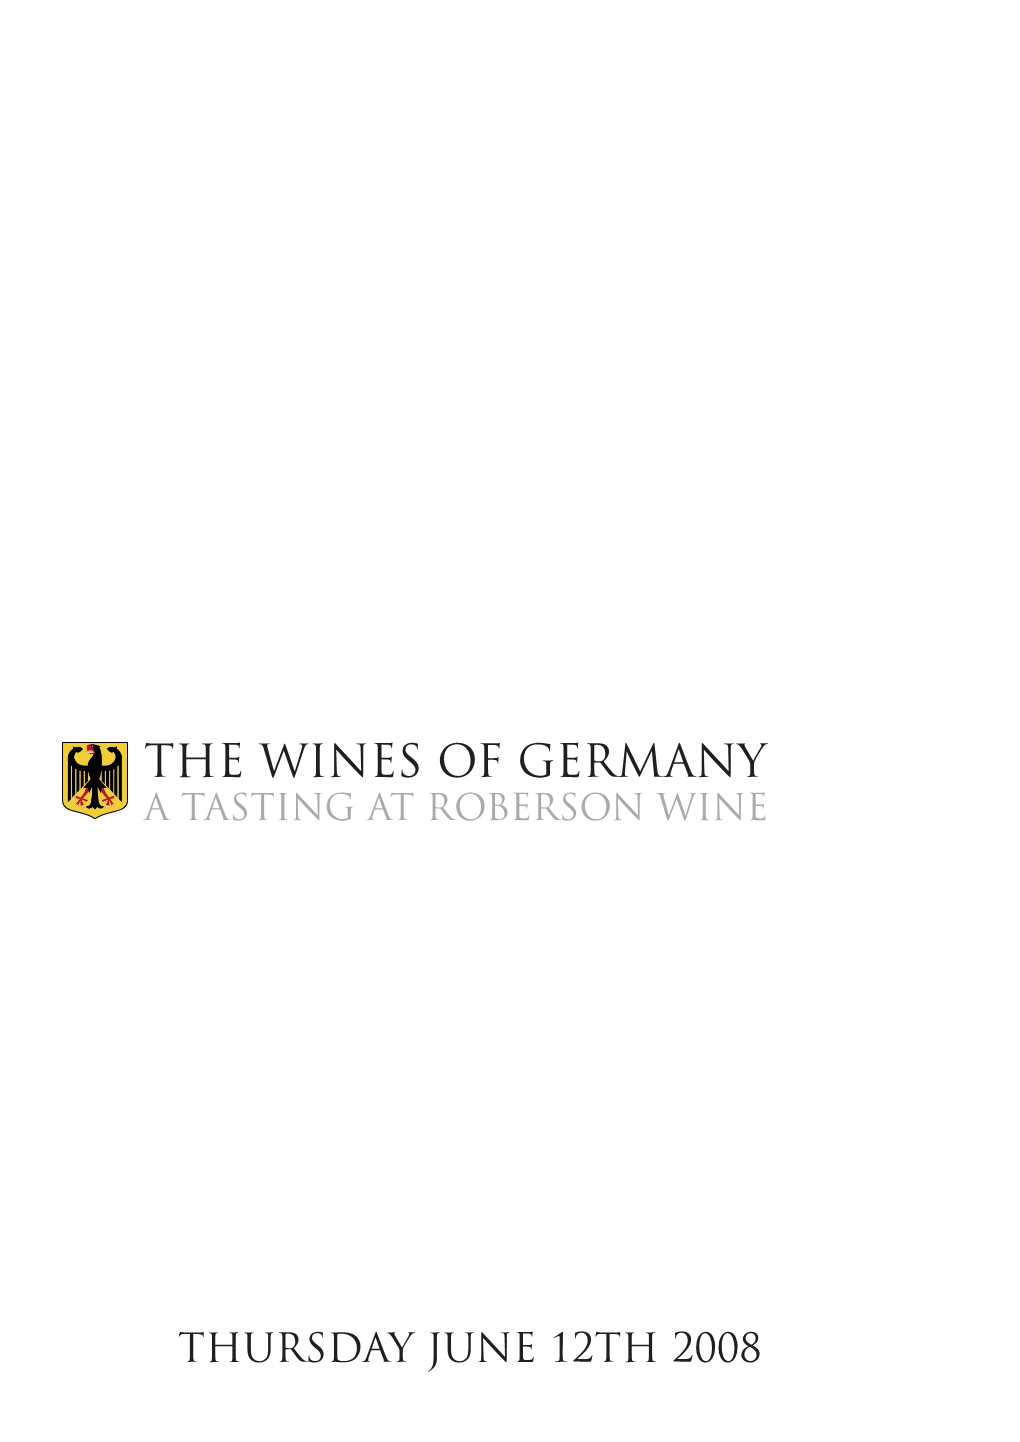 The Wines of Germany a Tasting at Roberson Wine